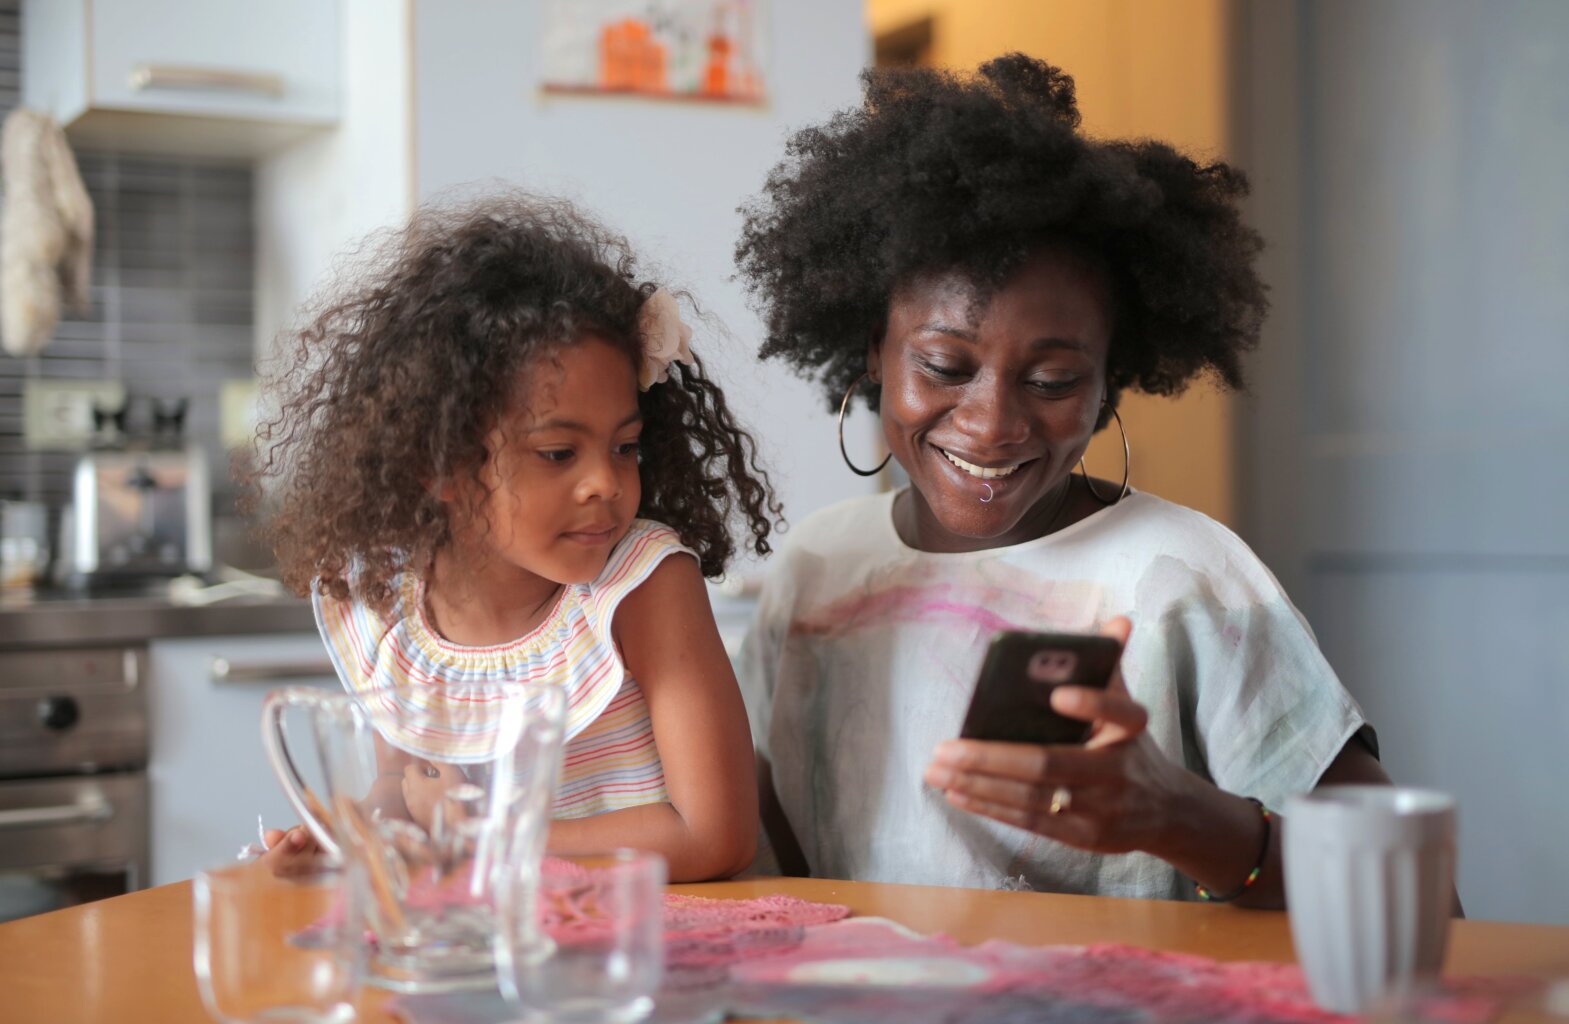 A mom and daughter scrolling through social media on a smart phone.